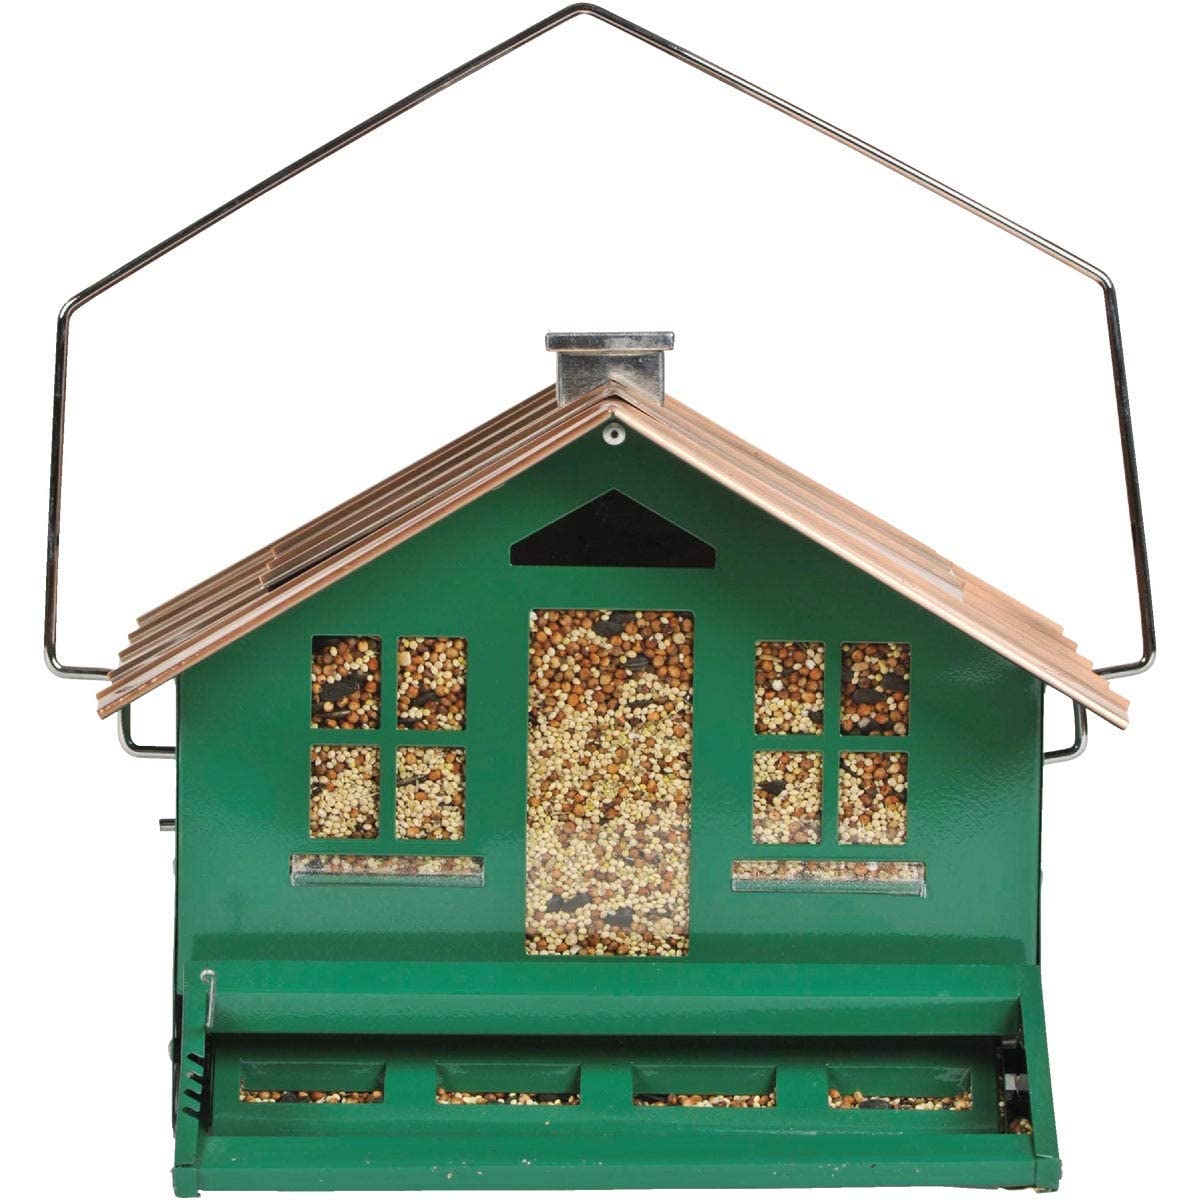 Perky-Pet 339-1SR Squirrel-Be-Gone II Home Style Bird Feeder with Chimney, Squirrel Proof Bird Feeder with Weight-Activated Perches, Large 8lb Capacity Outdoor Wild Bird Feeder